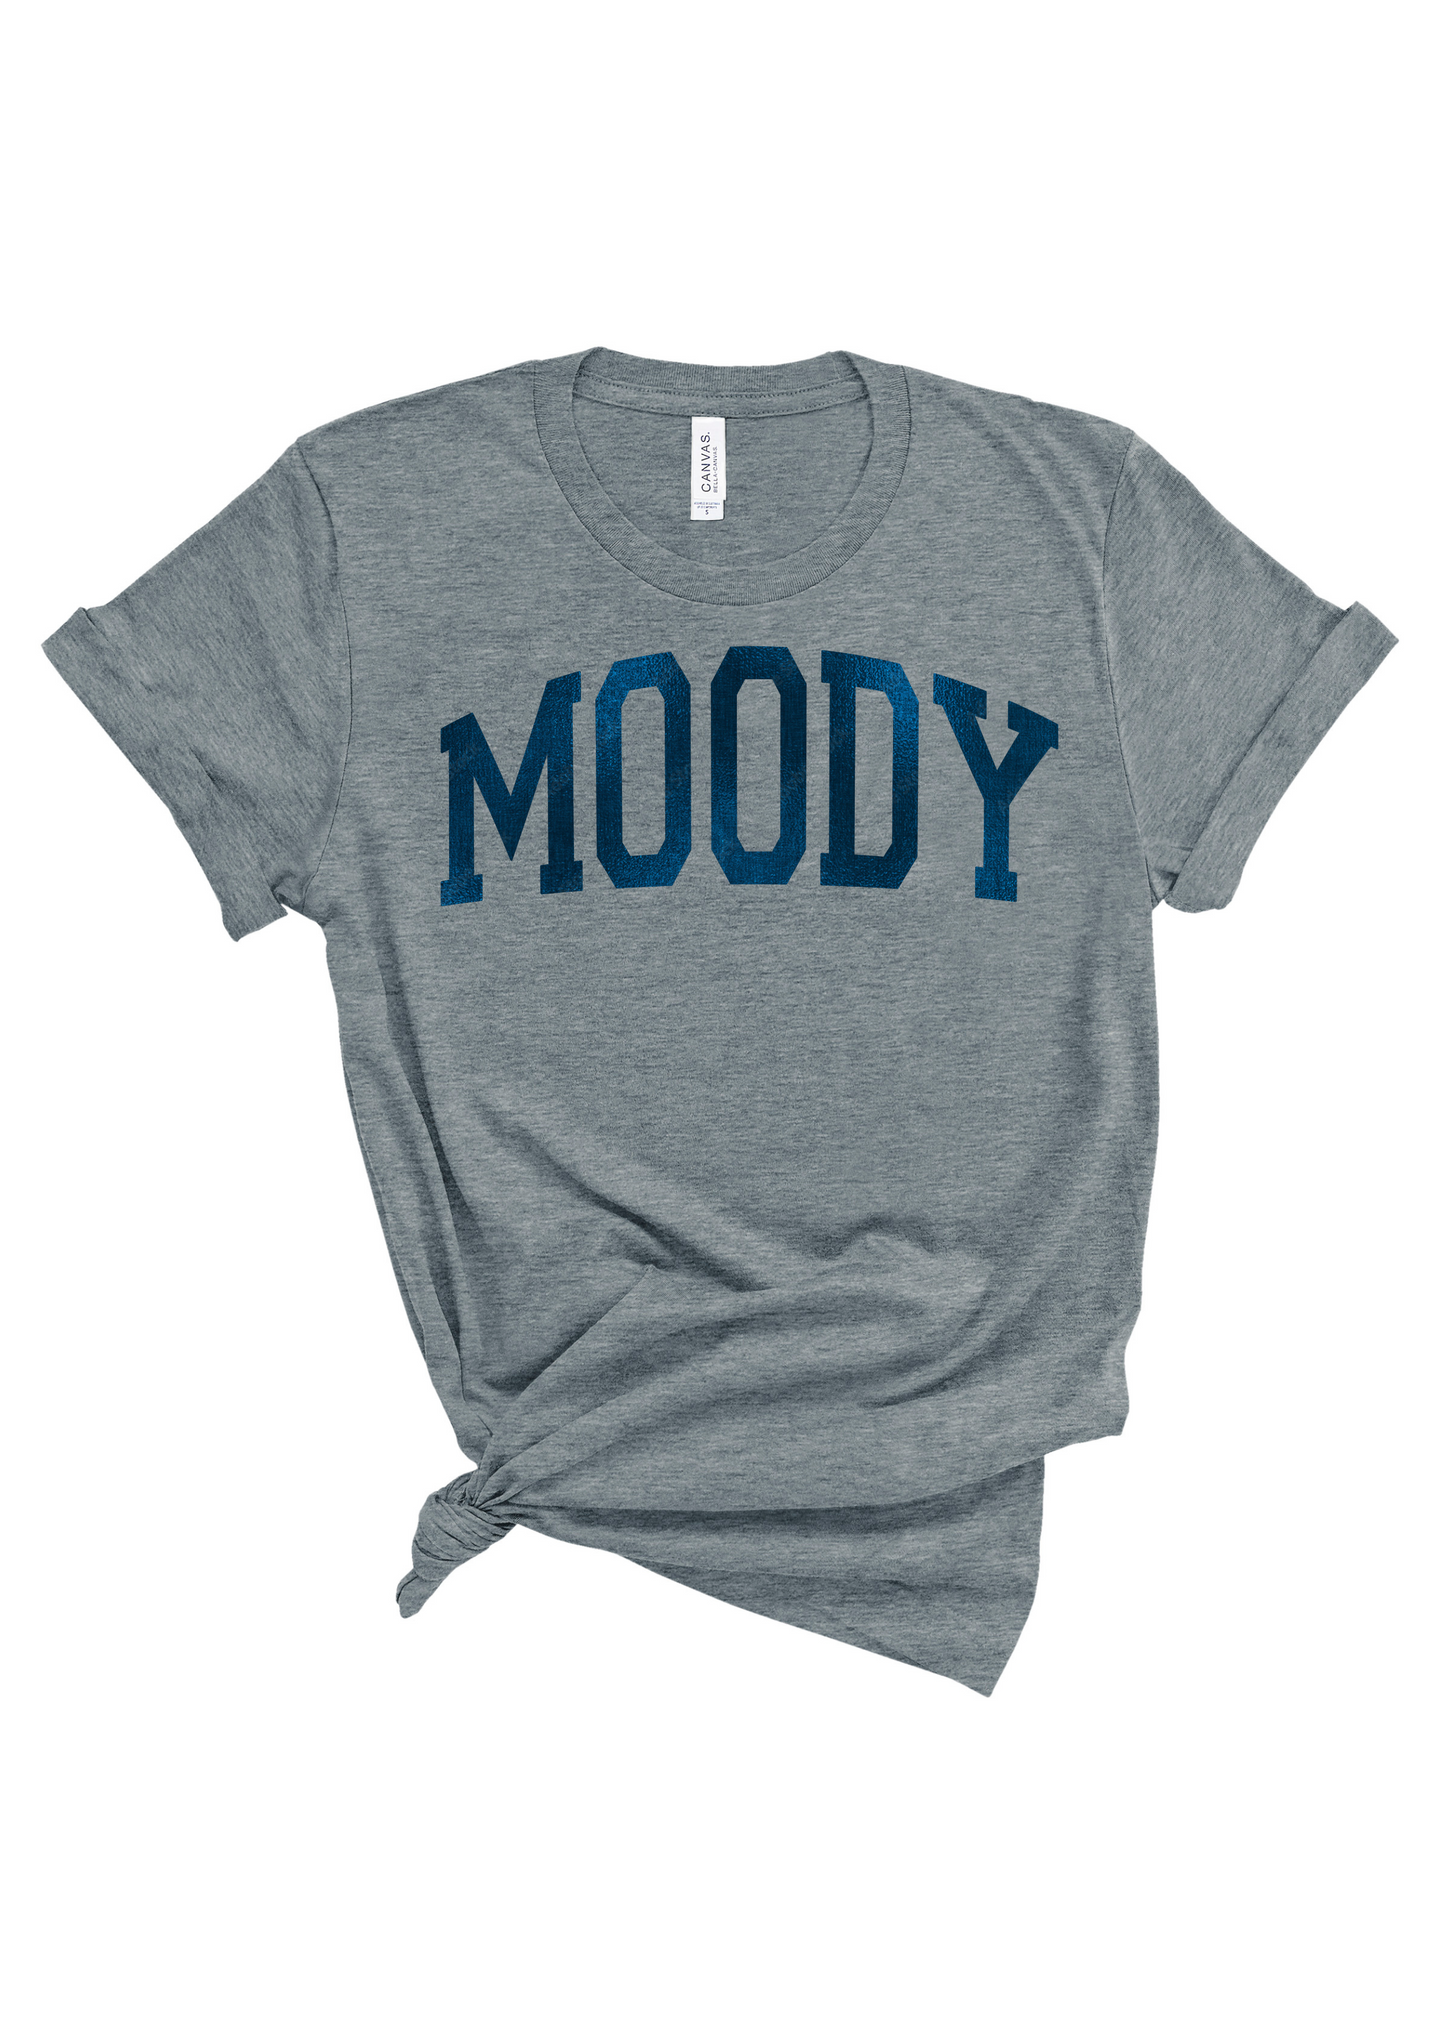 Moody Foil | Adult Tee-Adult Tee-Sister Shirts-Sister Shirts, Cute & Custom Tees for Mama & Littles in Trussville, Alabama.